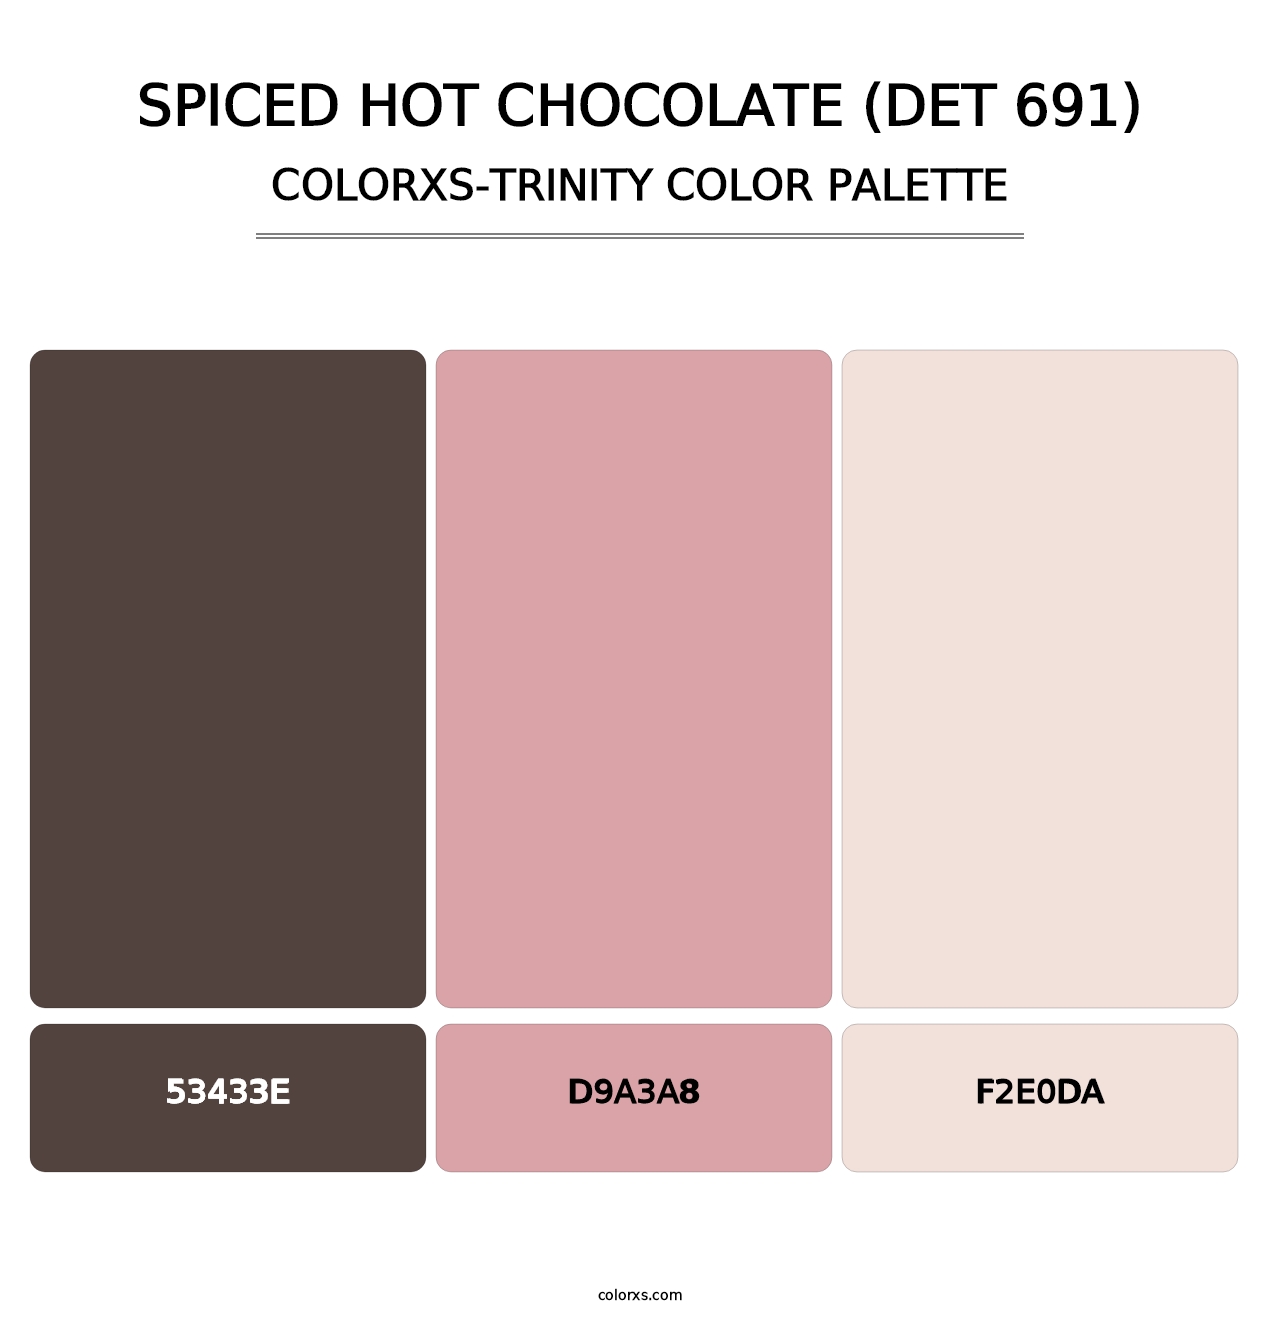 Spiced Hot Chocolate (DET 691) - Colorxs Trinity Palette